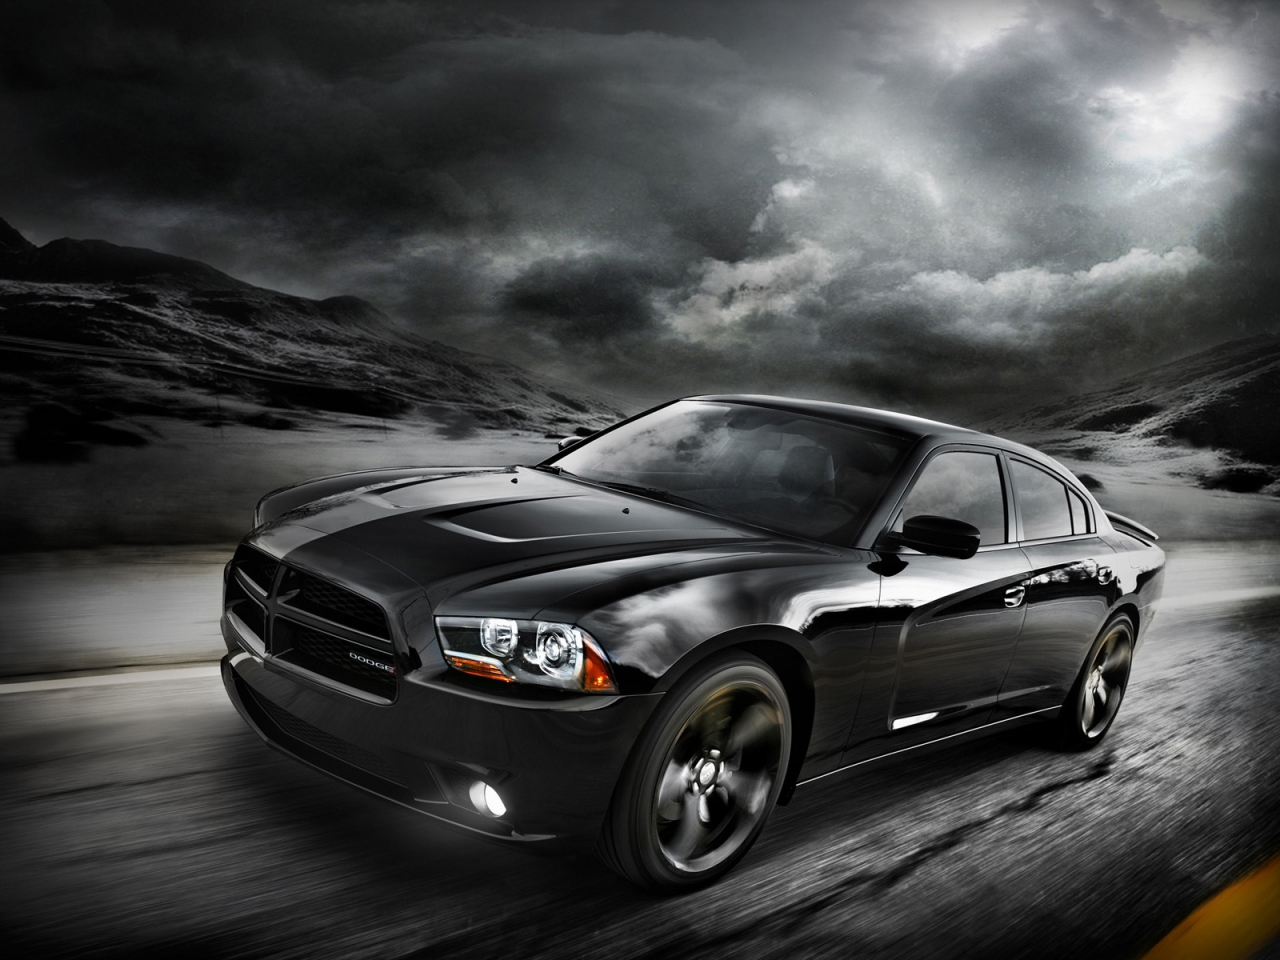 Dodge Charger Blacktop 2012 for 1280 x 960 resolution